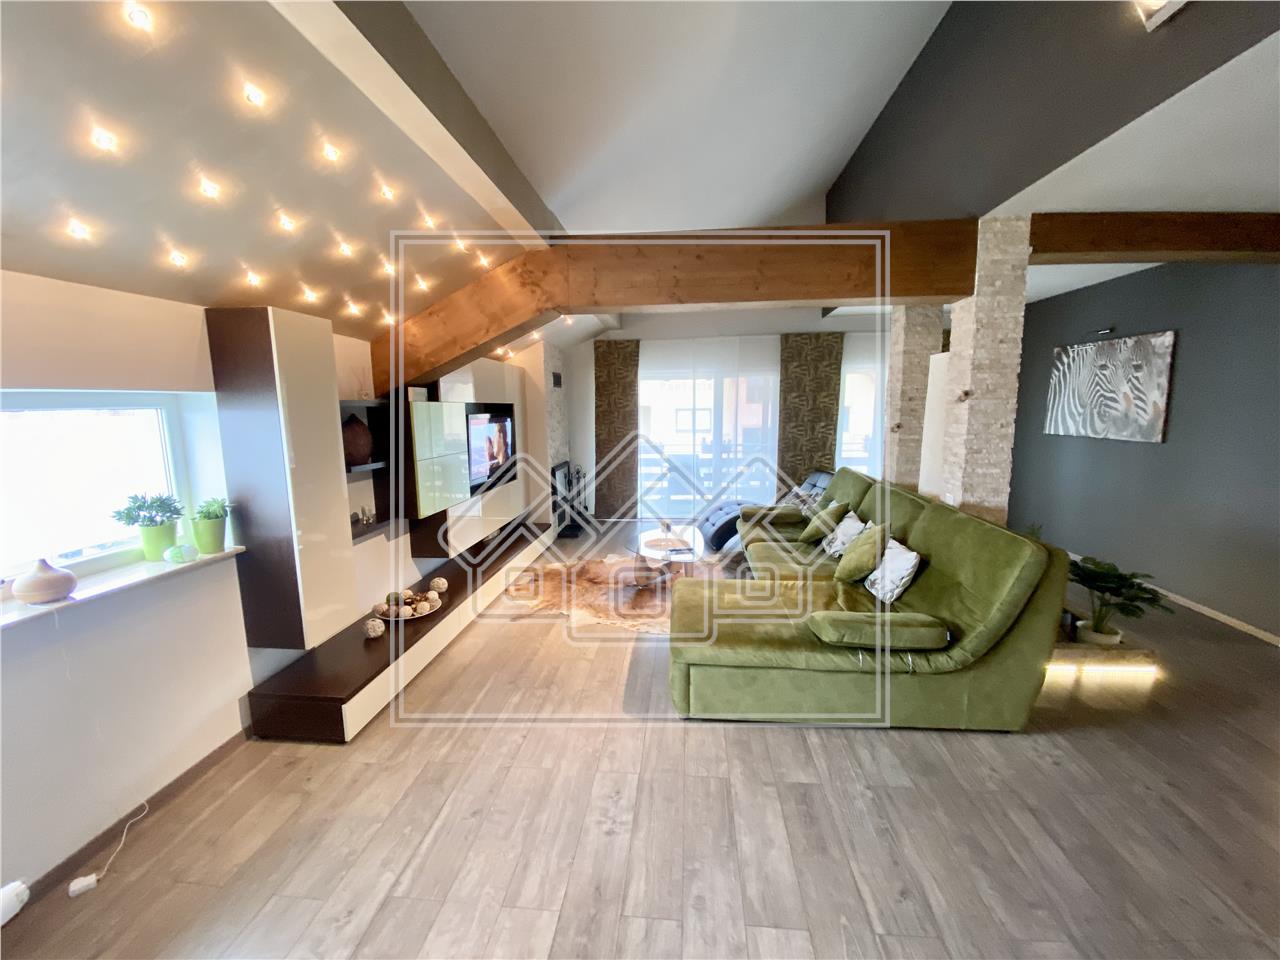 Penthouse for sale in Sibiu - 146 square meters - modern furnished and